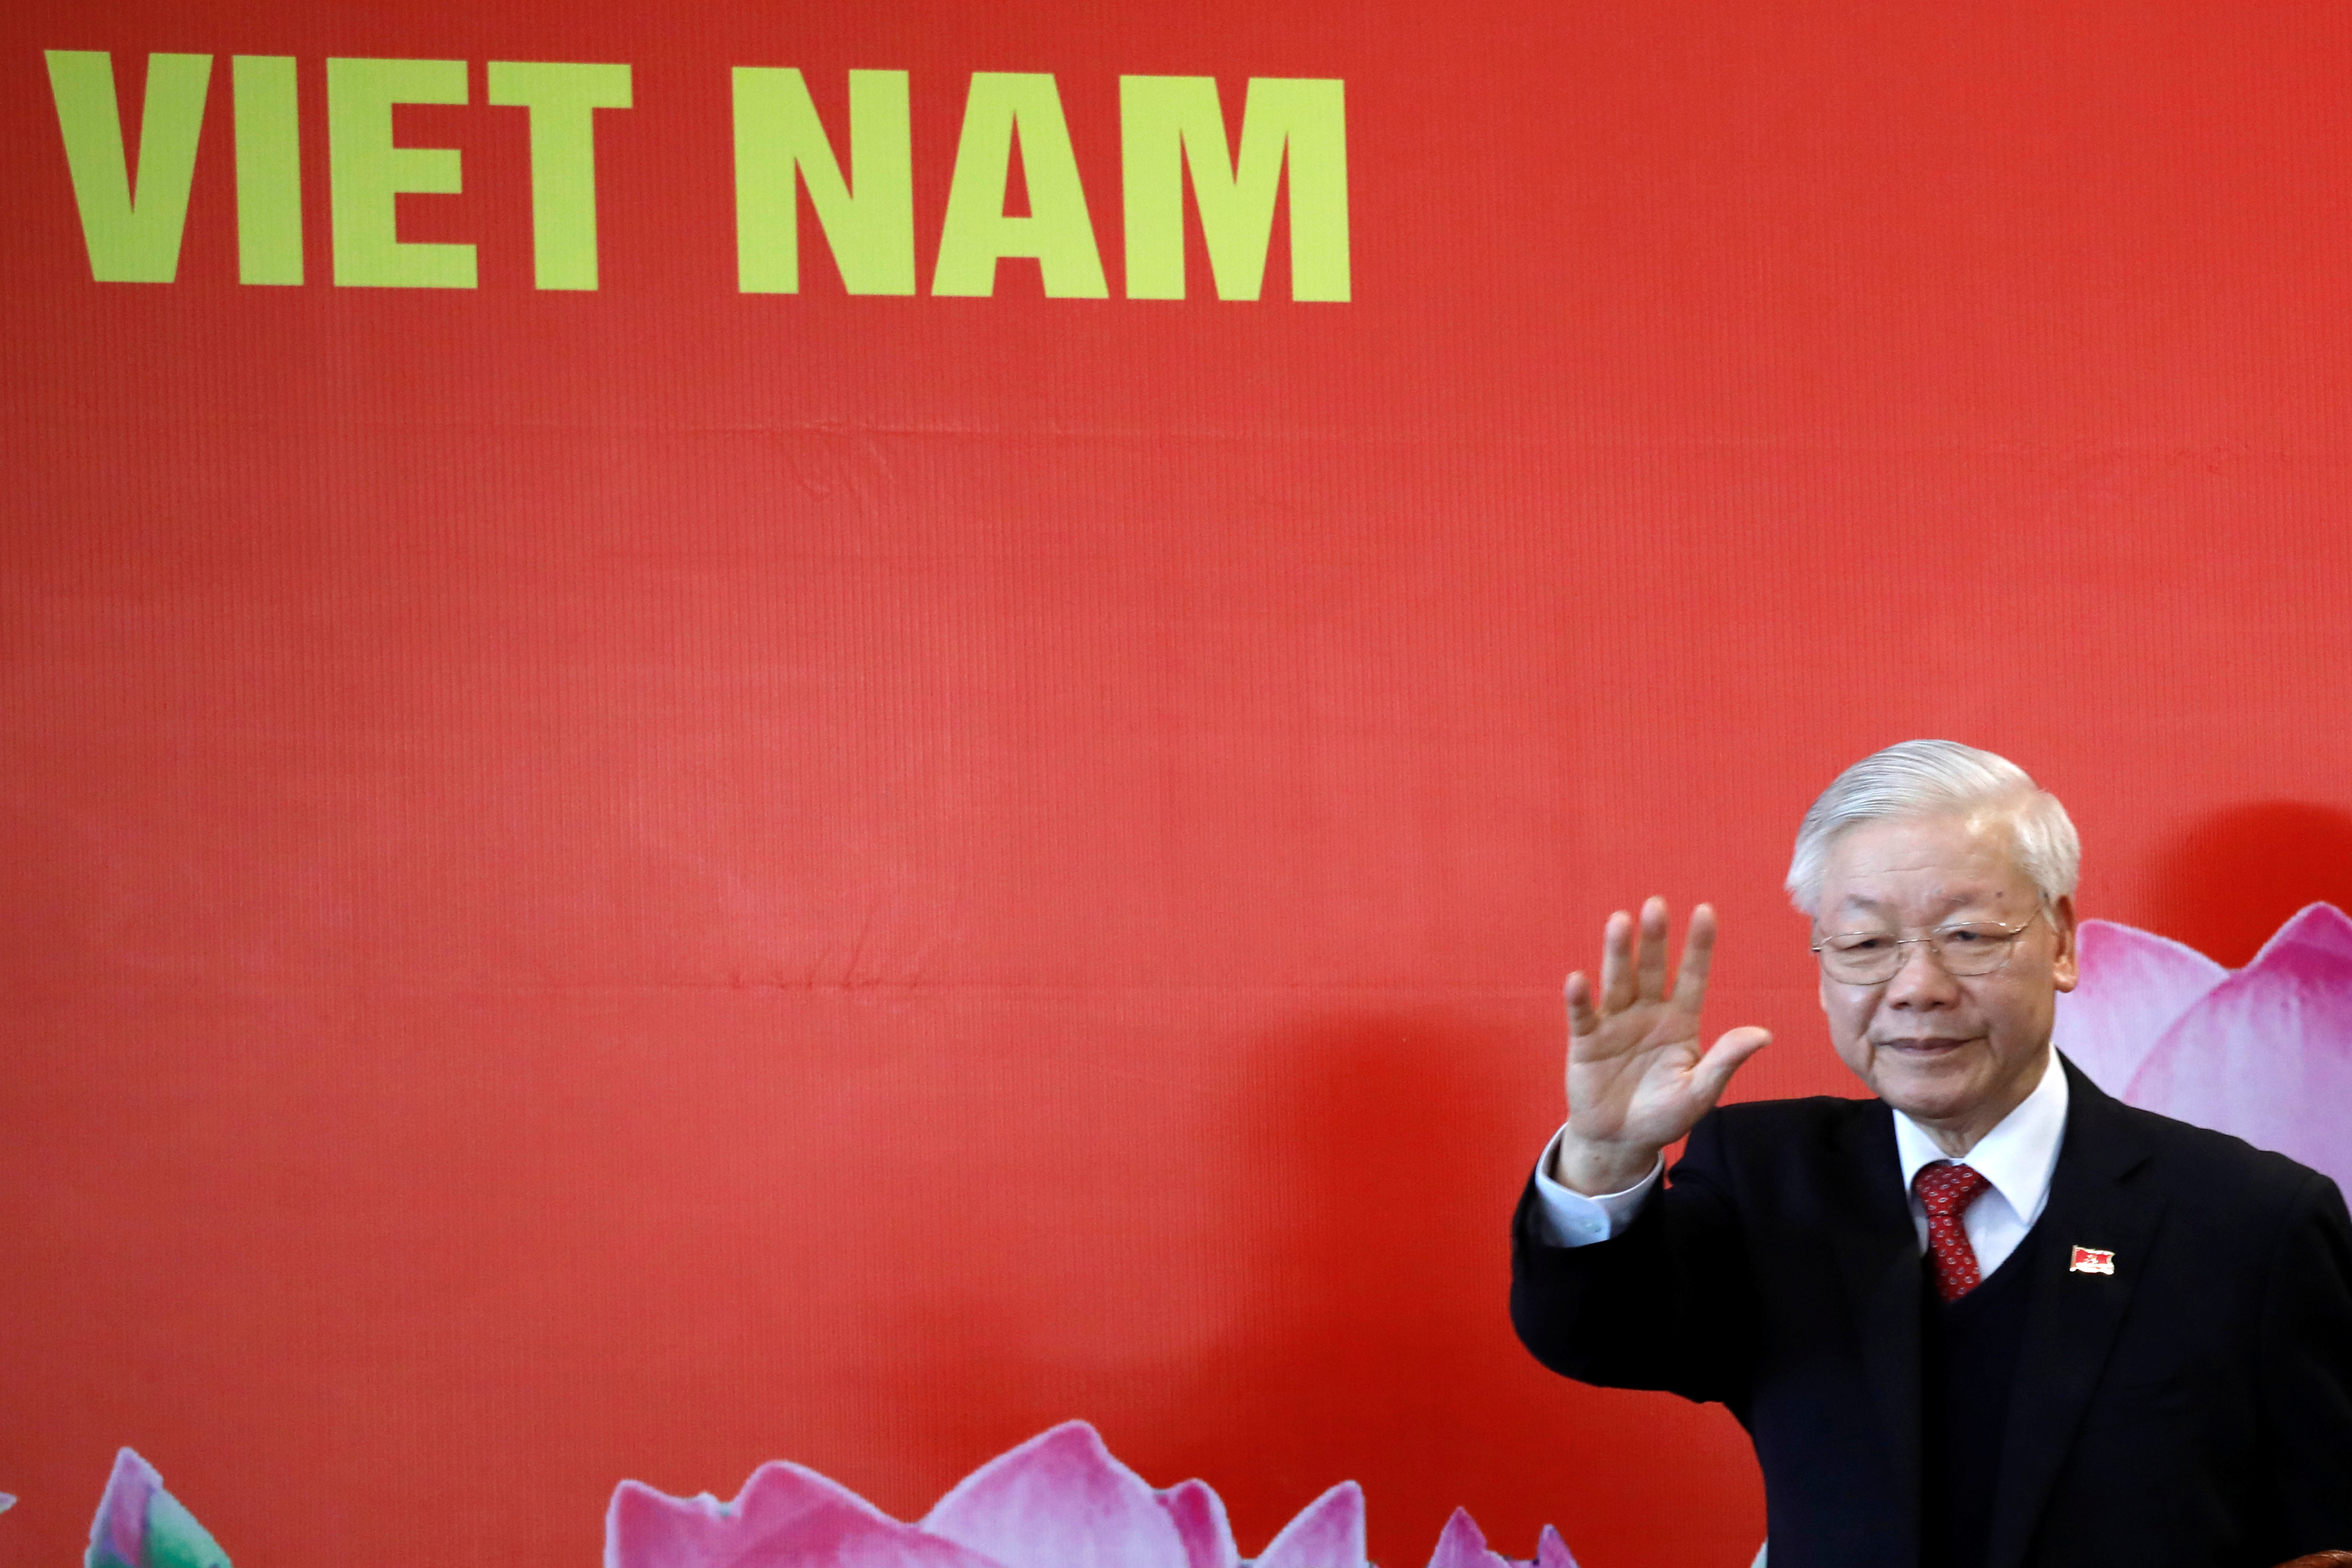 13th national congress of the ruling communist party of Vietnam in Hanoi